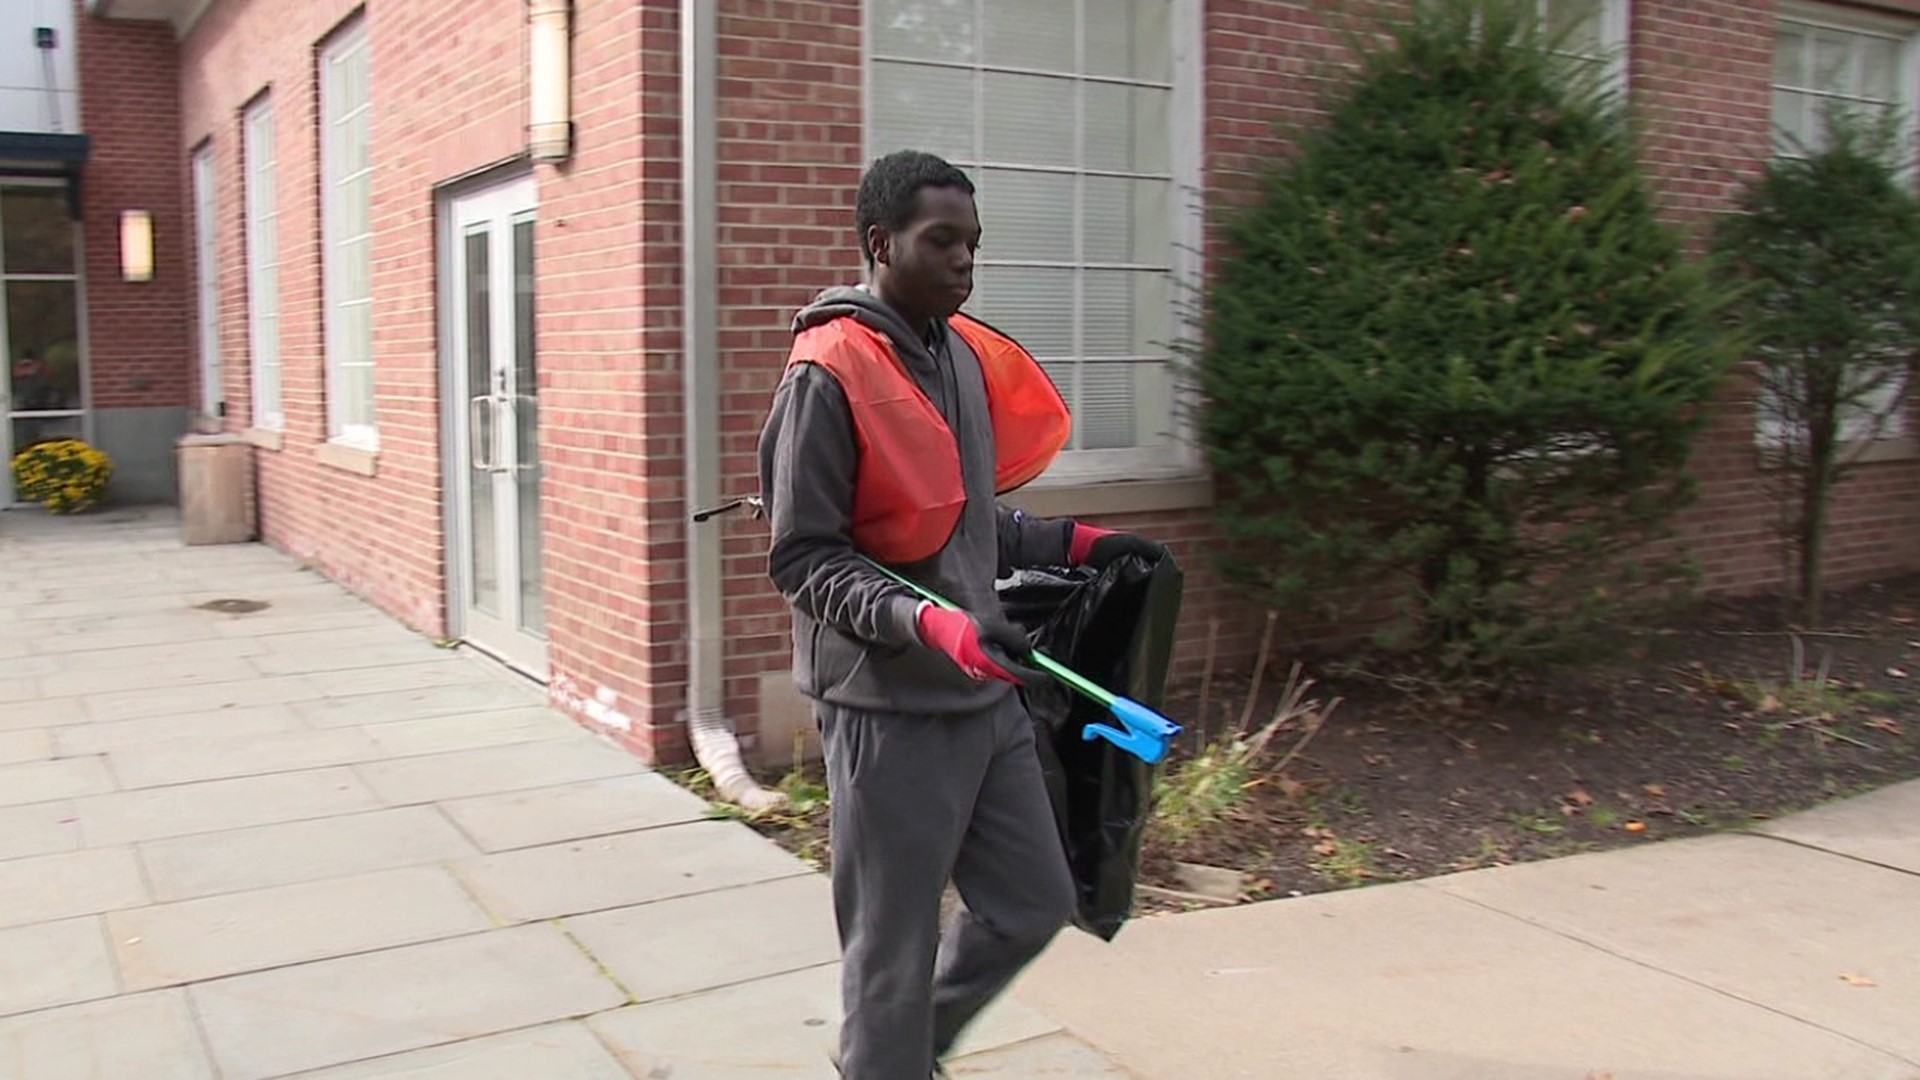 The unseasonably warm temperatures are allowing people to get outside without bundling up, to do some chores they may not have gotten to otherwise.